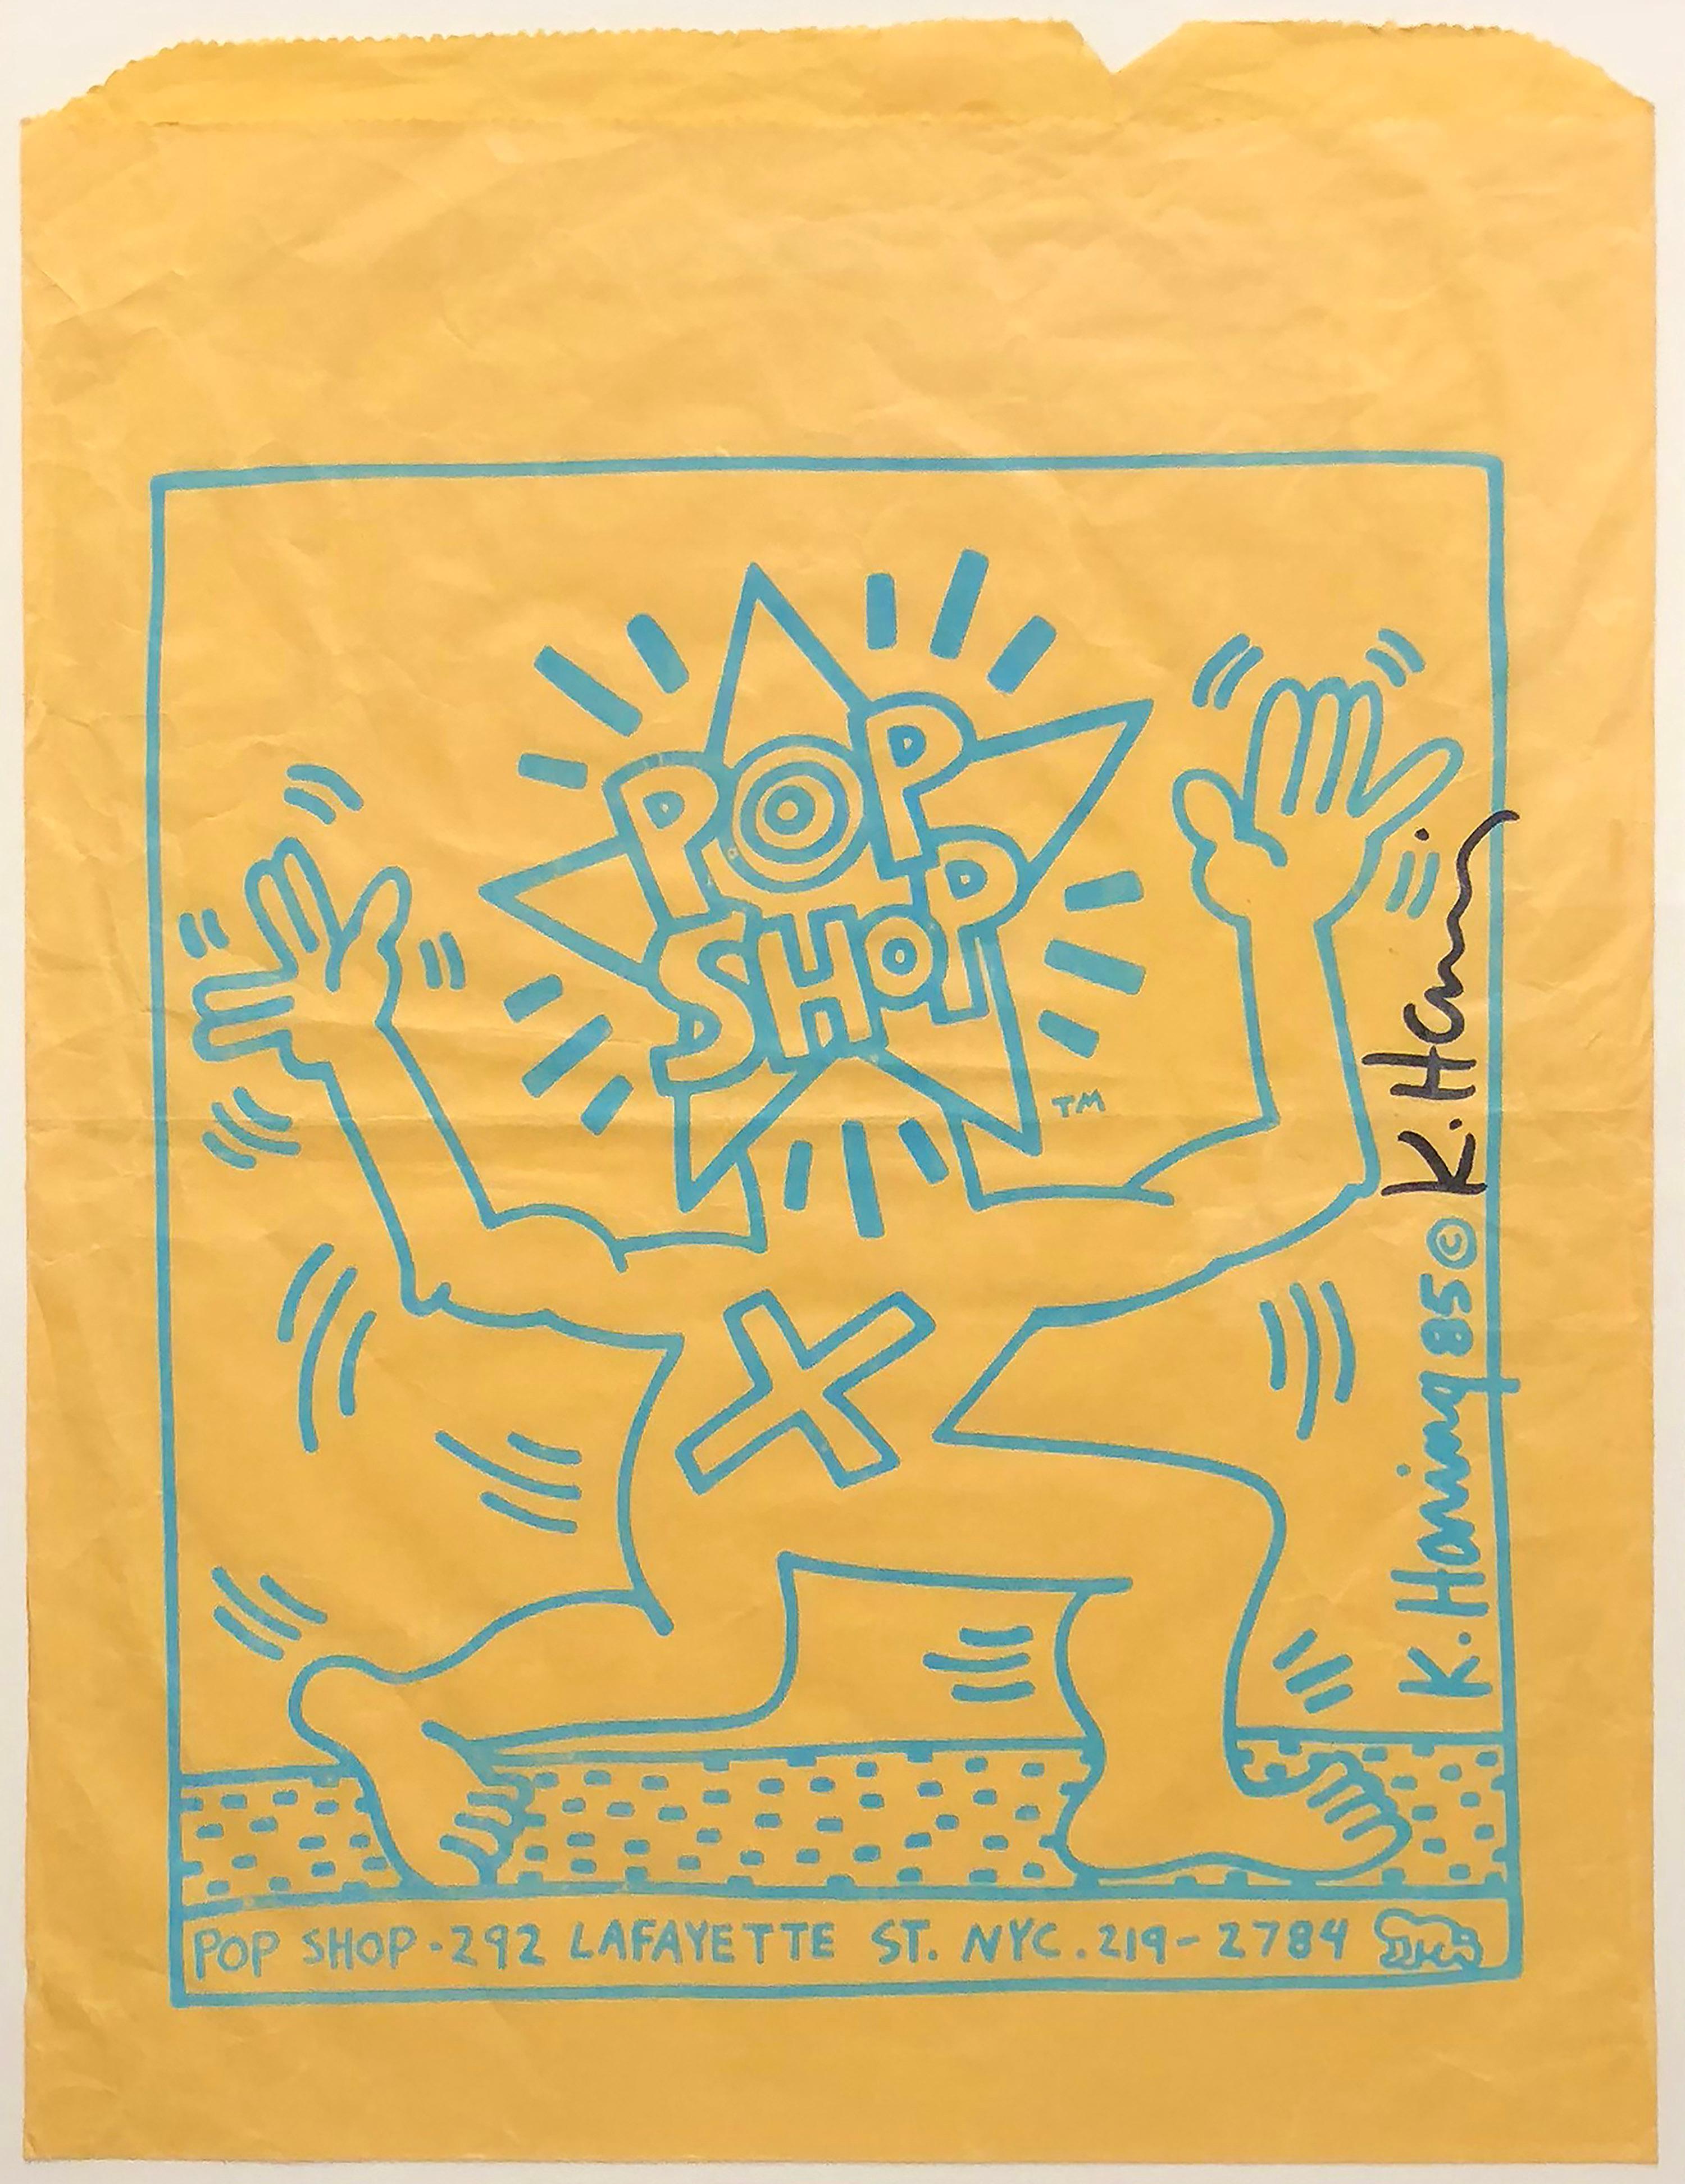 Keith Haring Figurative Print - Original Hand-Signed "Pop Shop" Paper Bag From 1985 NYC AIDS Event